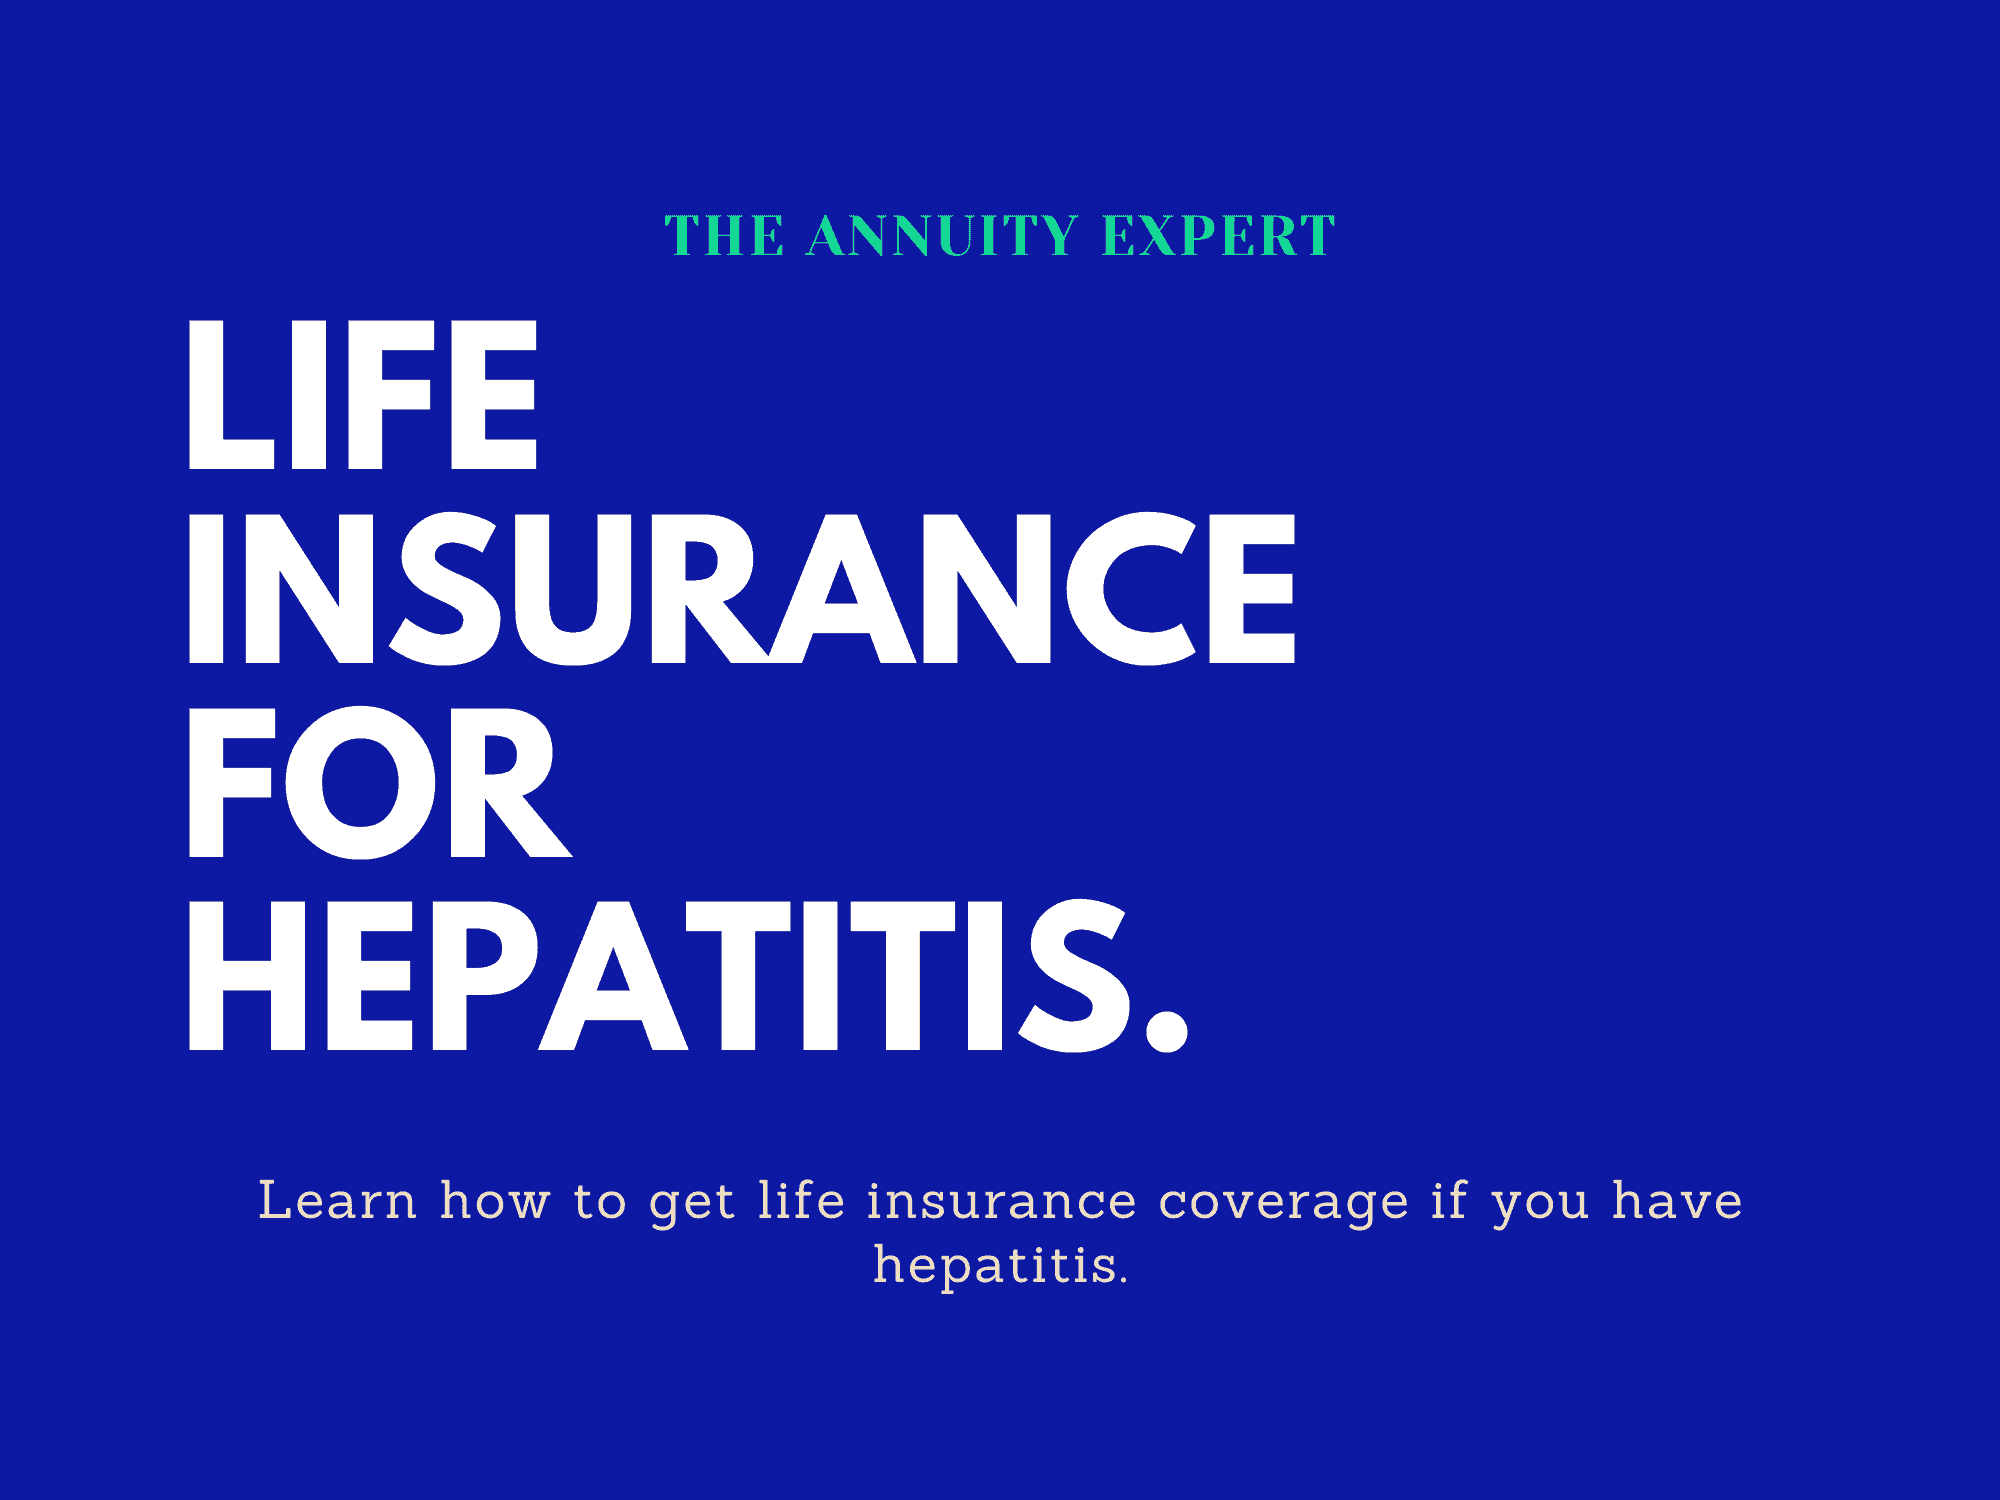 How To Get Life Insurance With Hepatitis A,B, and C (2021)